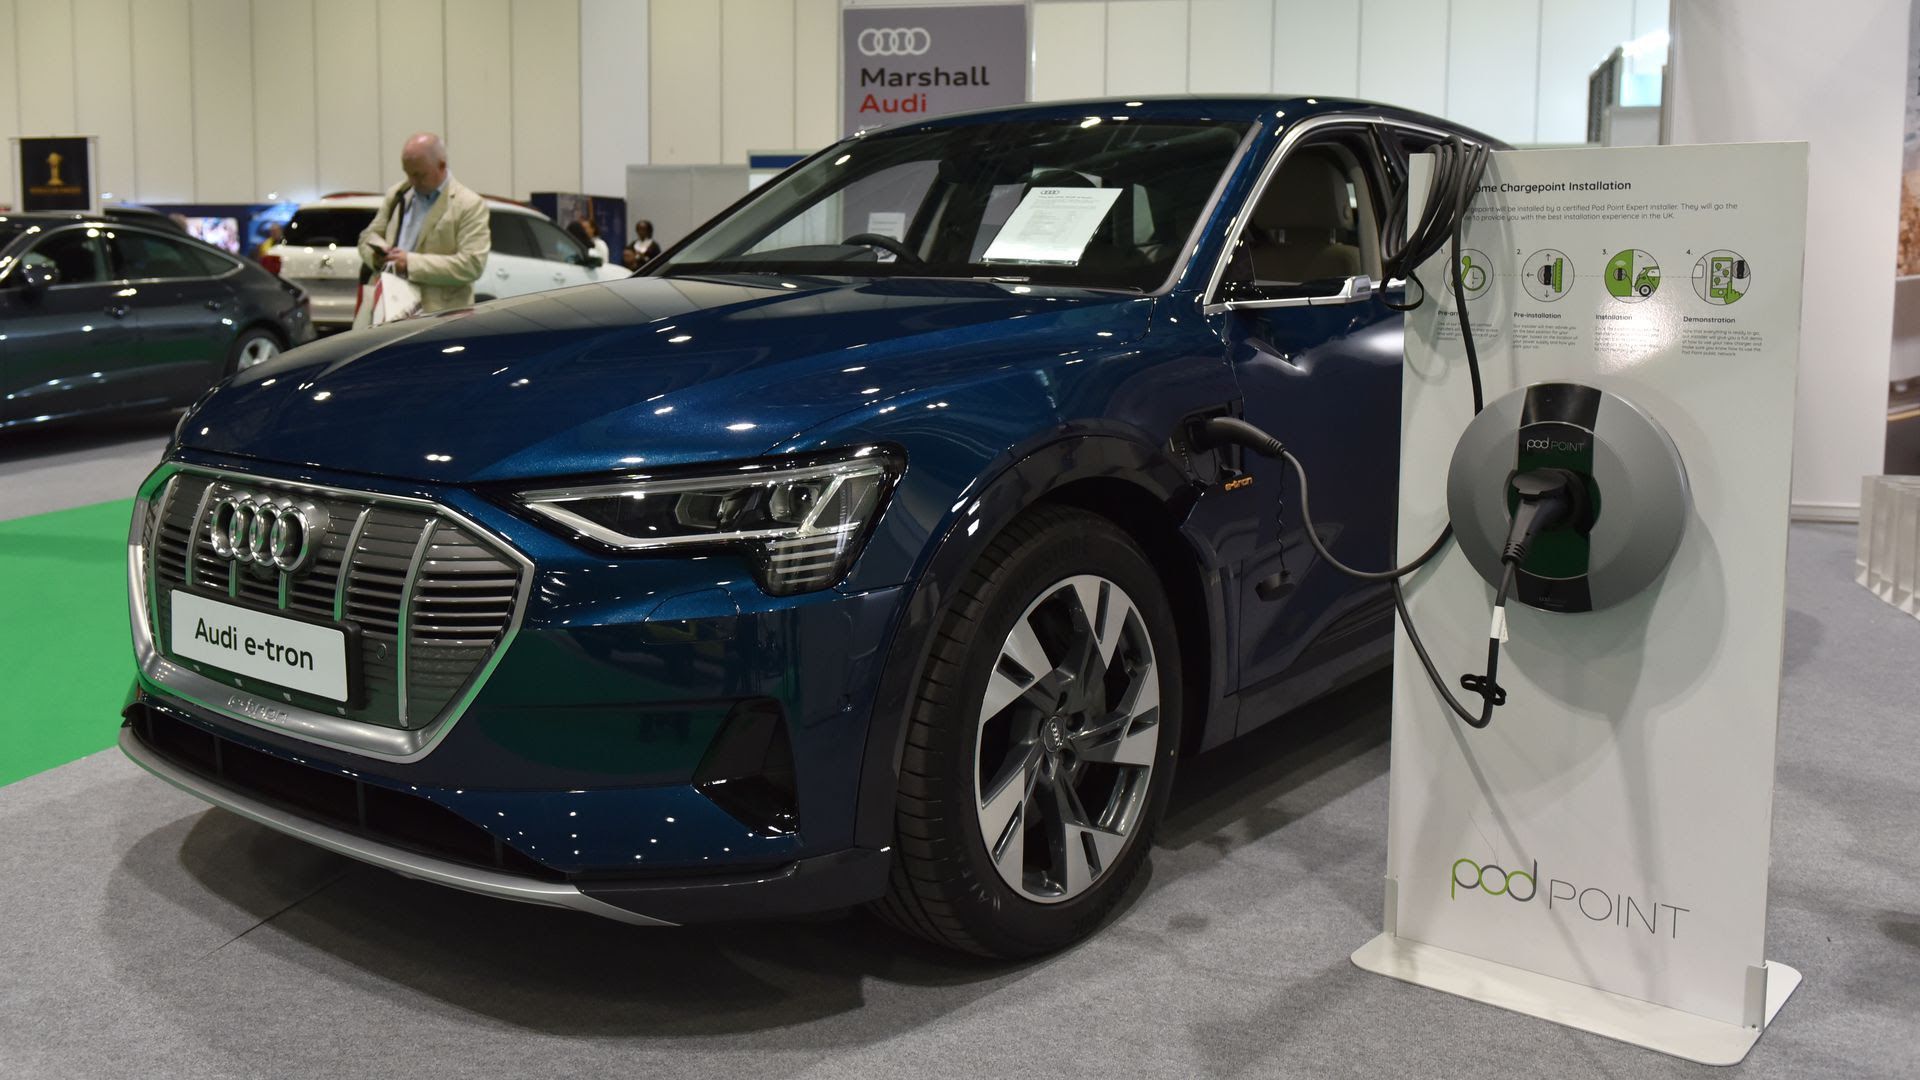 An Audi E-Tron electric SUV is displayed during the May London Motor and Tech Show. Photo: John Keeble/Getty Images